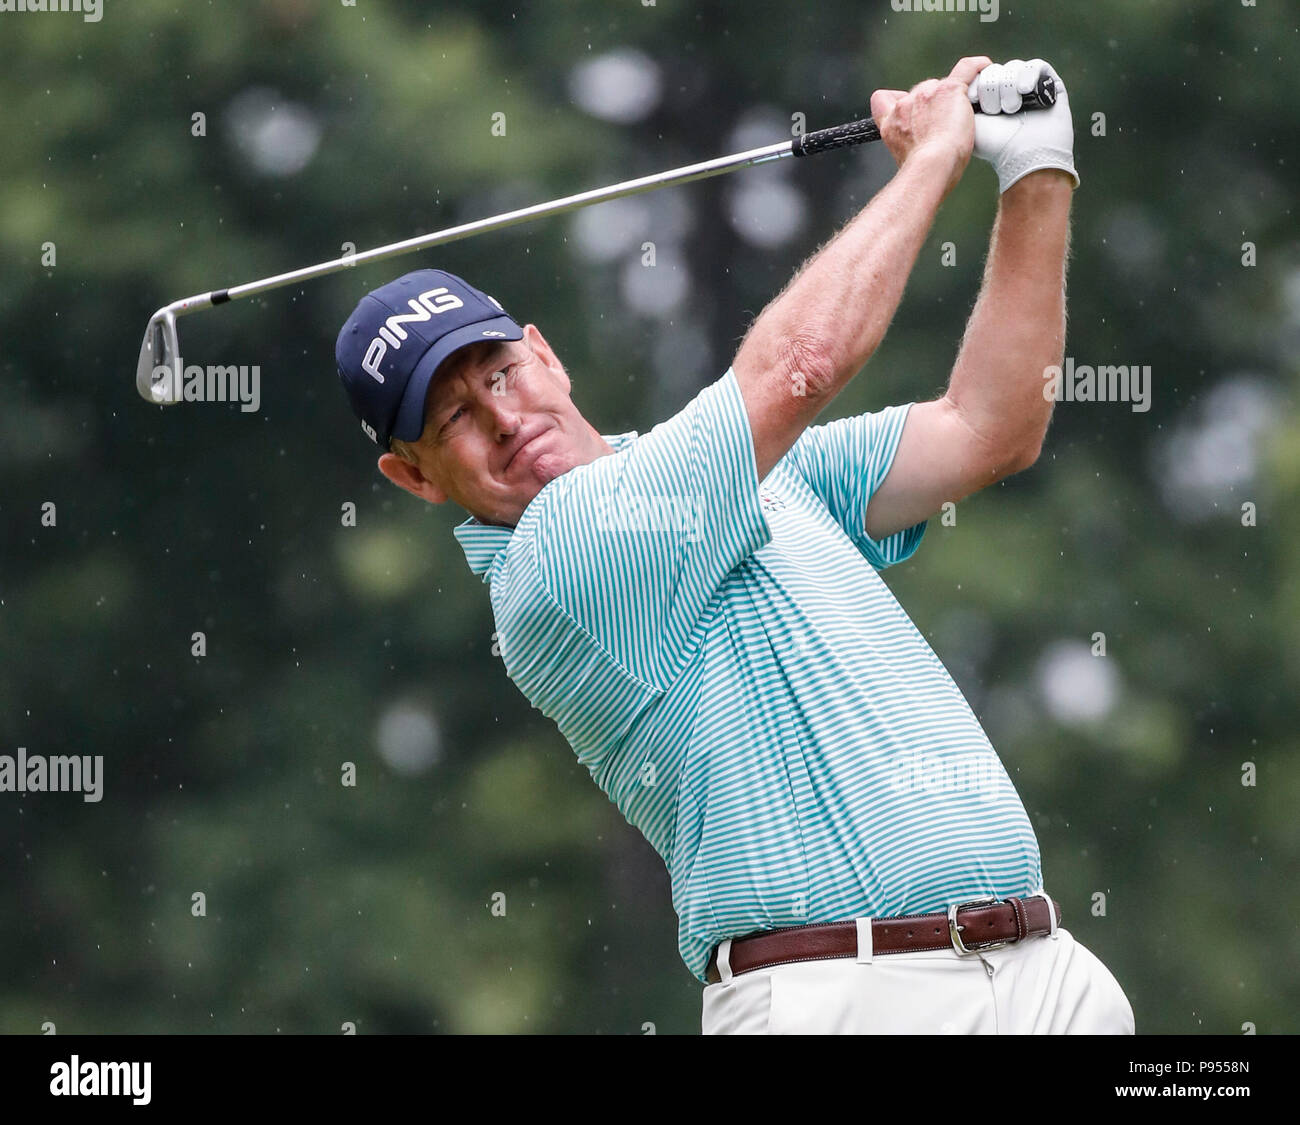 Chicago, USA. 14th July, 2018. Jeff Maggert tees off the 8th hole during the third round of Constellation Senior Players Championship golf tournament at Exmoor Country Club on the PGA Tour Champions in Highland Park, Chicago, the United States, on July 14, 2018. Credit: Joel Lerner/Xinhua/Alamy Live News Stock Photo